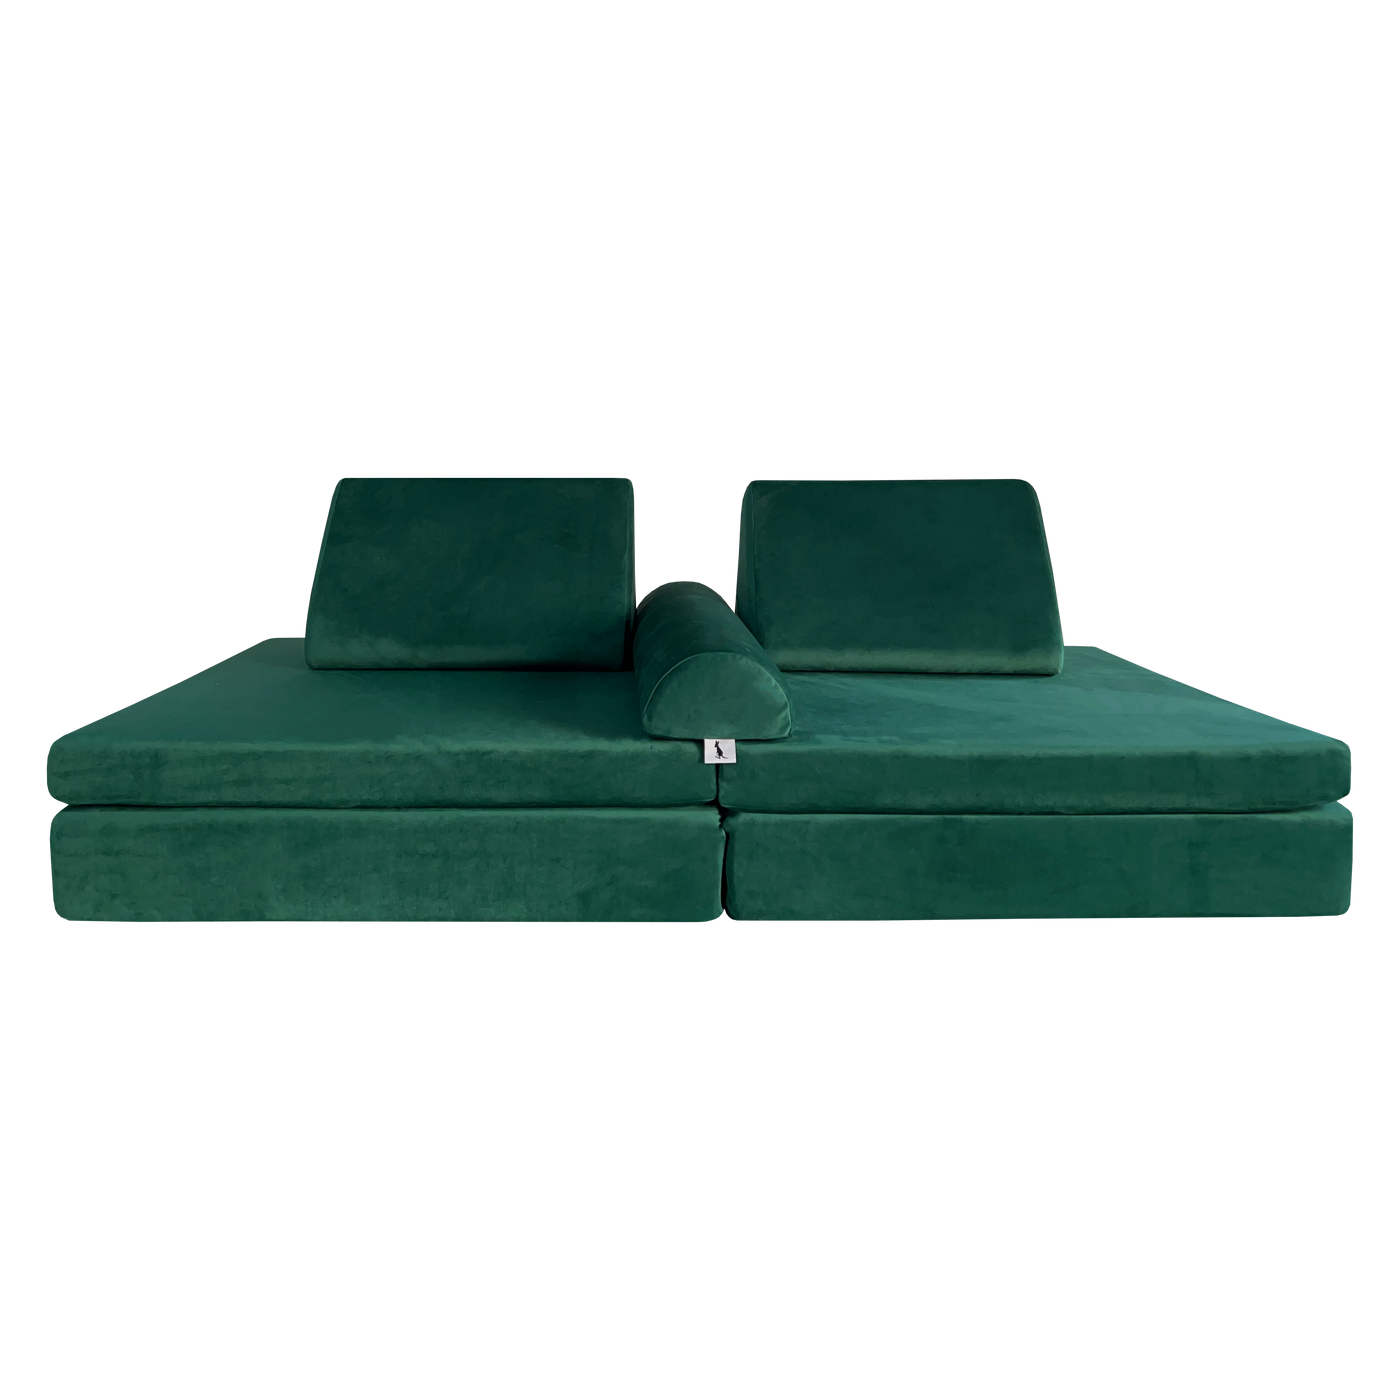 Jewel Tone Play Couch Cover Set